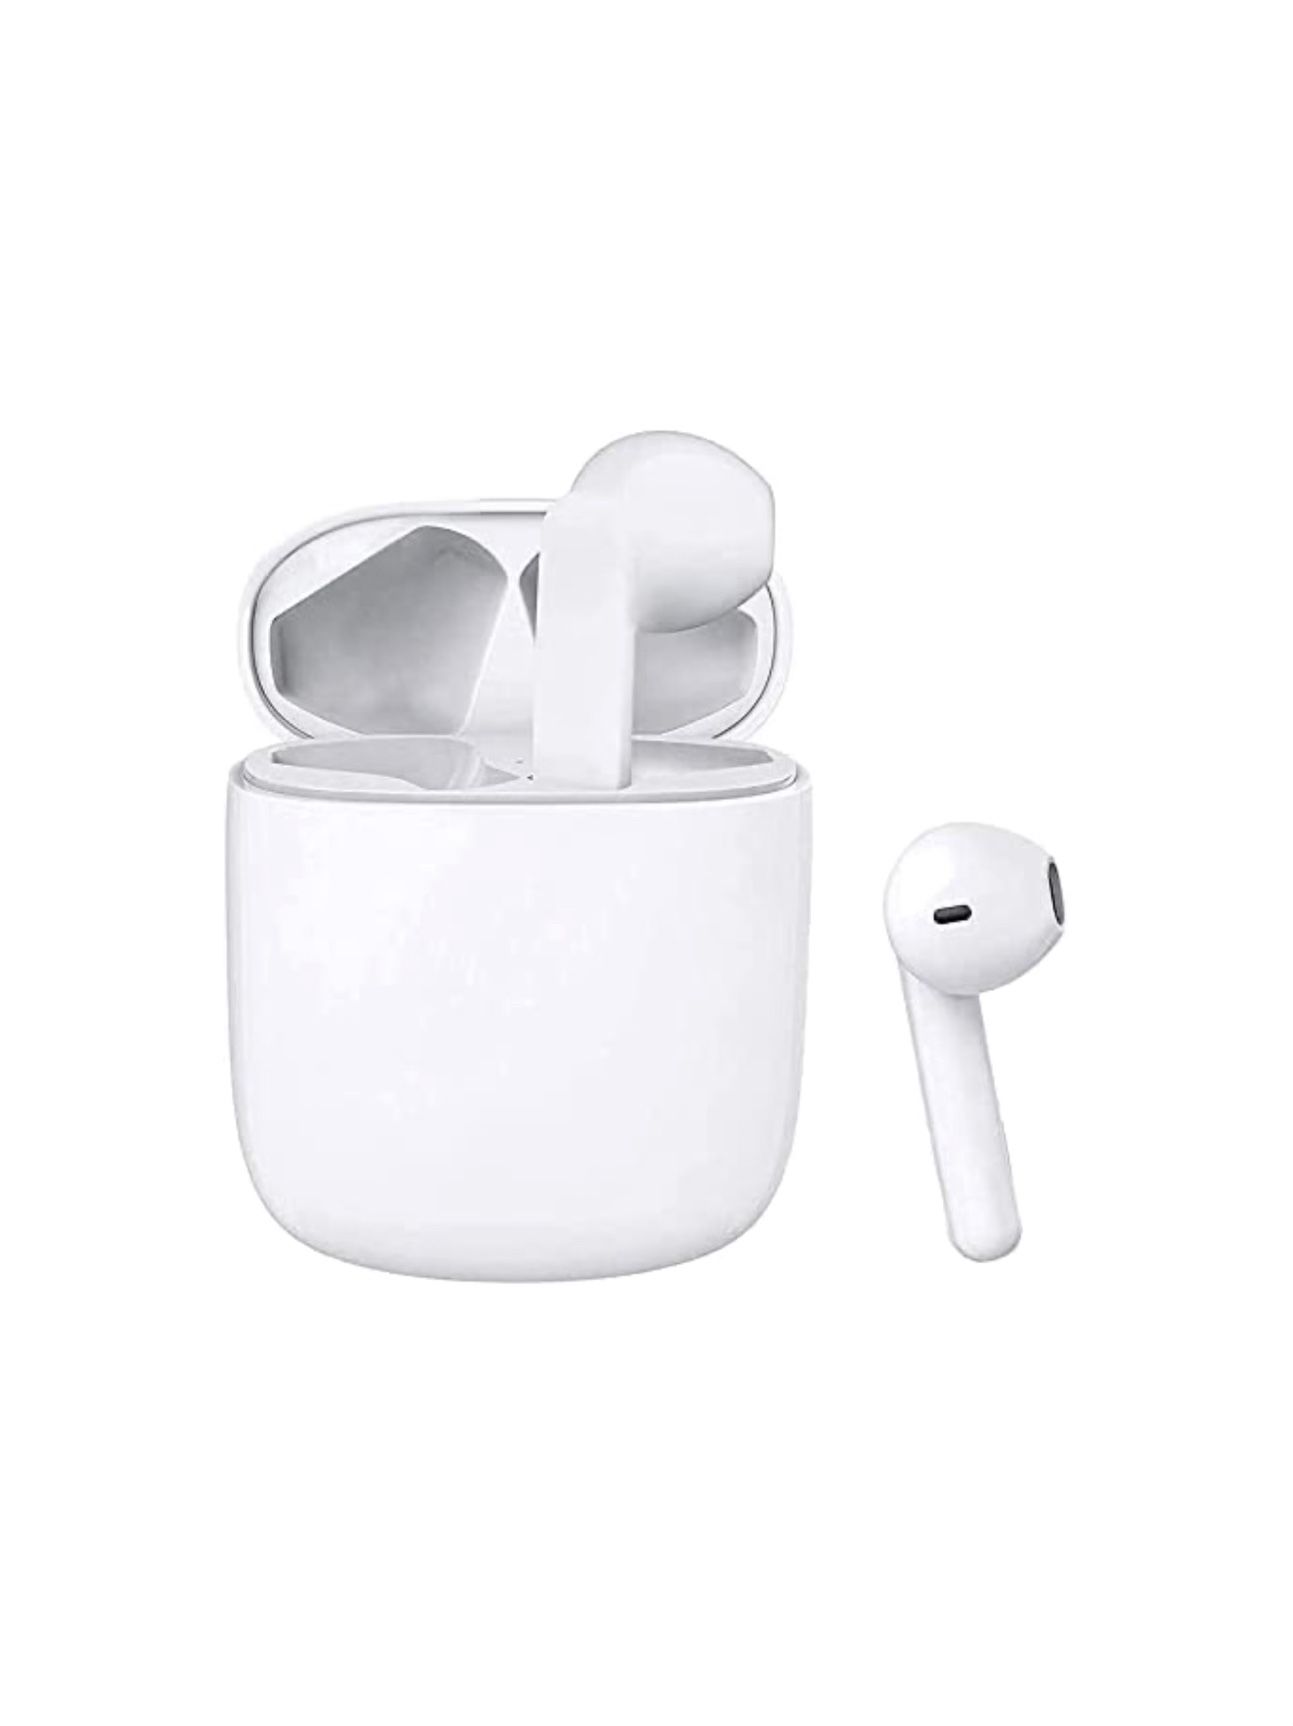 Wireless Earbuds,Bluetooth Headphones Stereo Earphone Cordless Sport Headsets,Bluetooth in-Ear Earphones with Built-in Mic for Smart Phones (White-C)